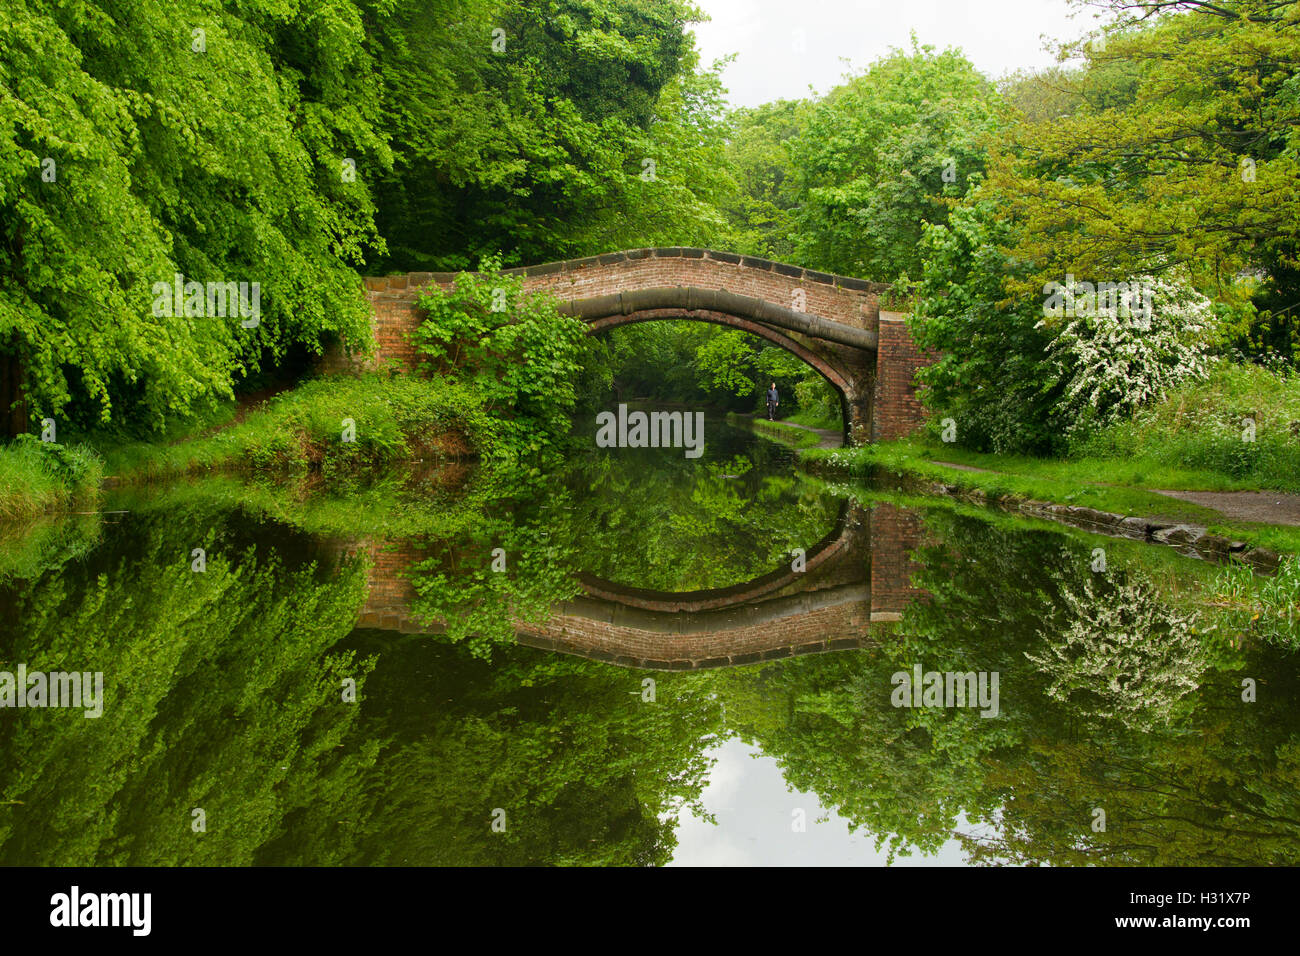 Stunning view of emerald woodlands severed by Llangollen canal with historic stone arched bridge & trees reflected in surface of water in Britain Stock Photo